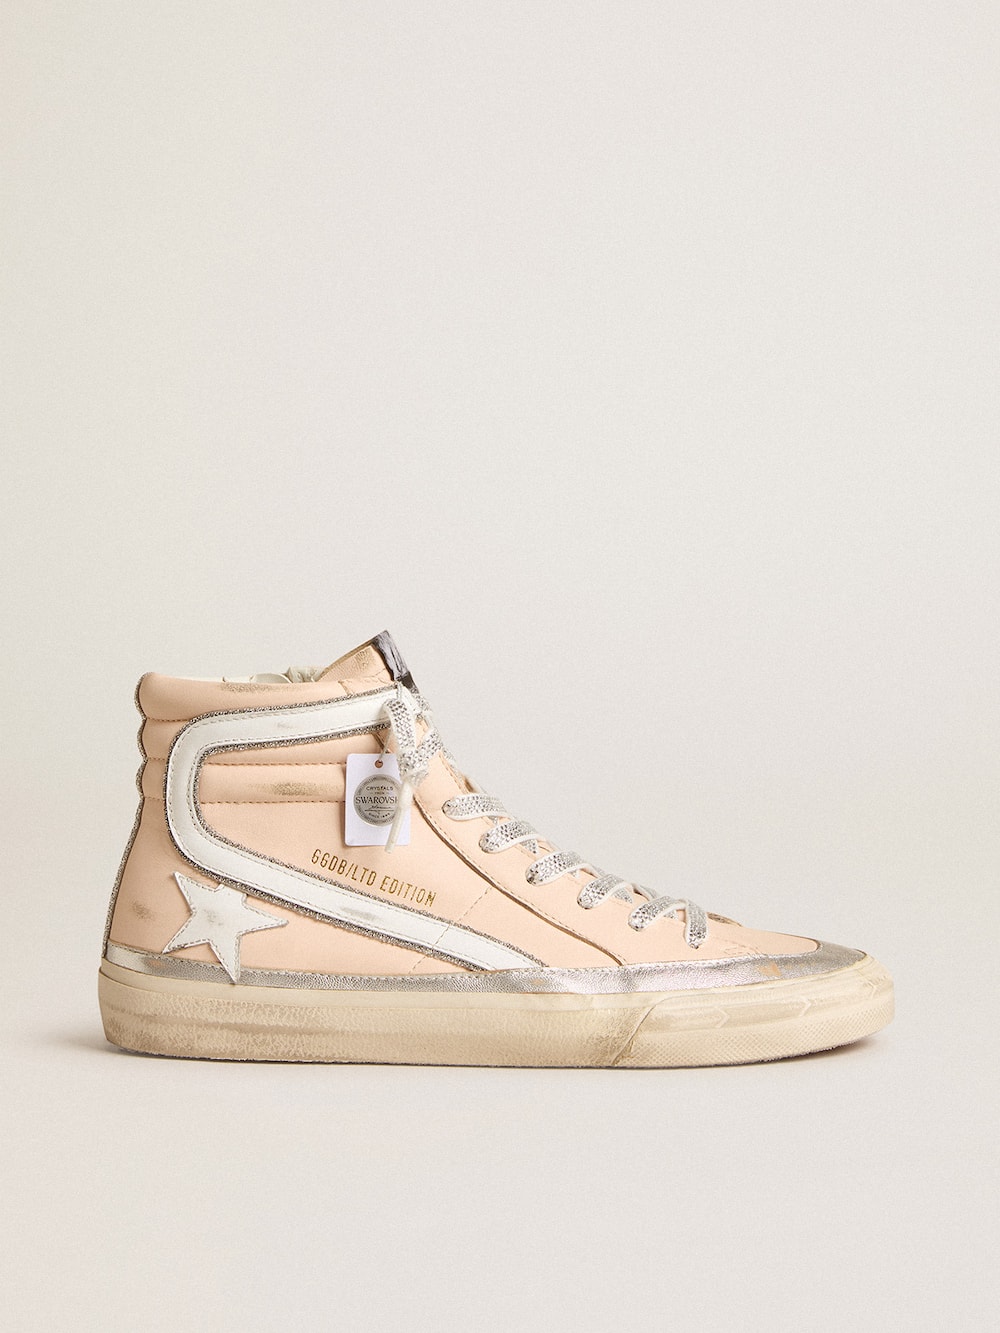 Golden Goose - Slide LTD in pink nappa leather with white star and Swarovski inserts in 